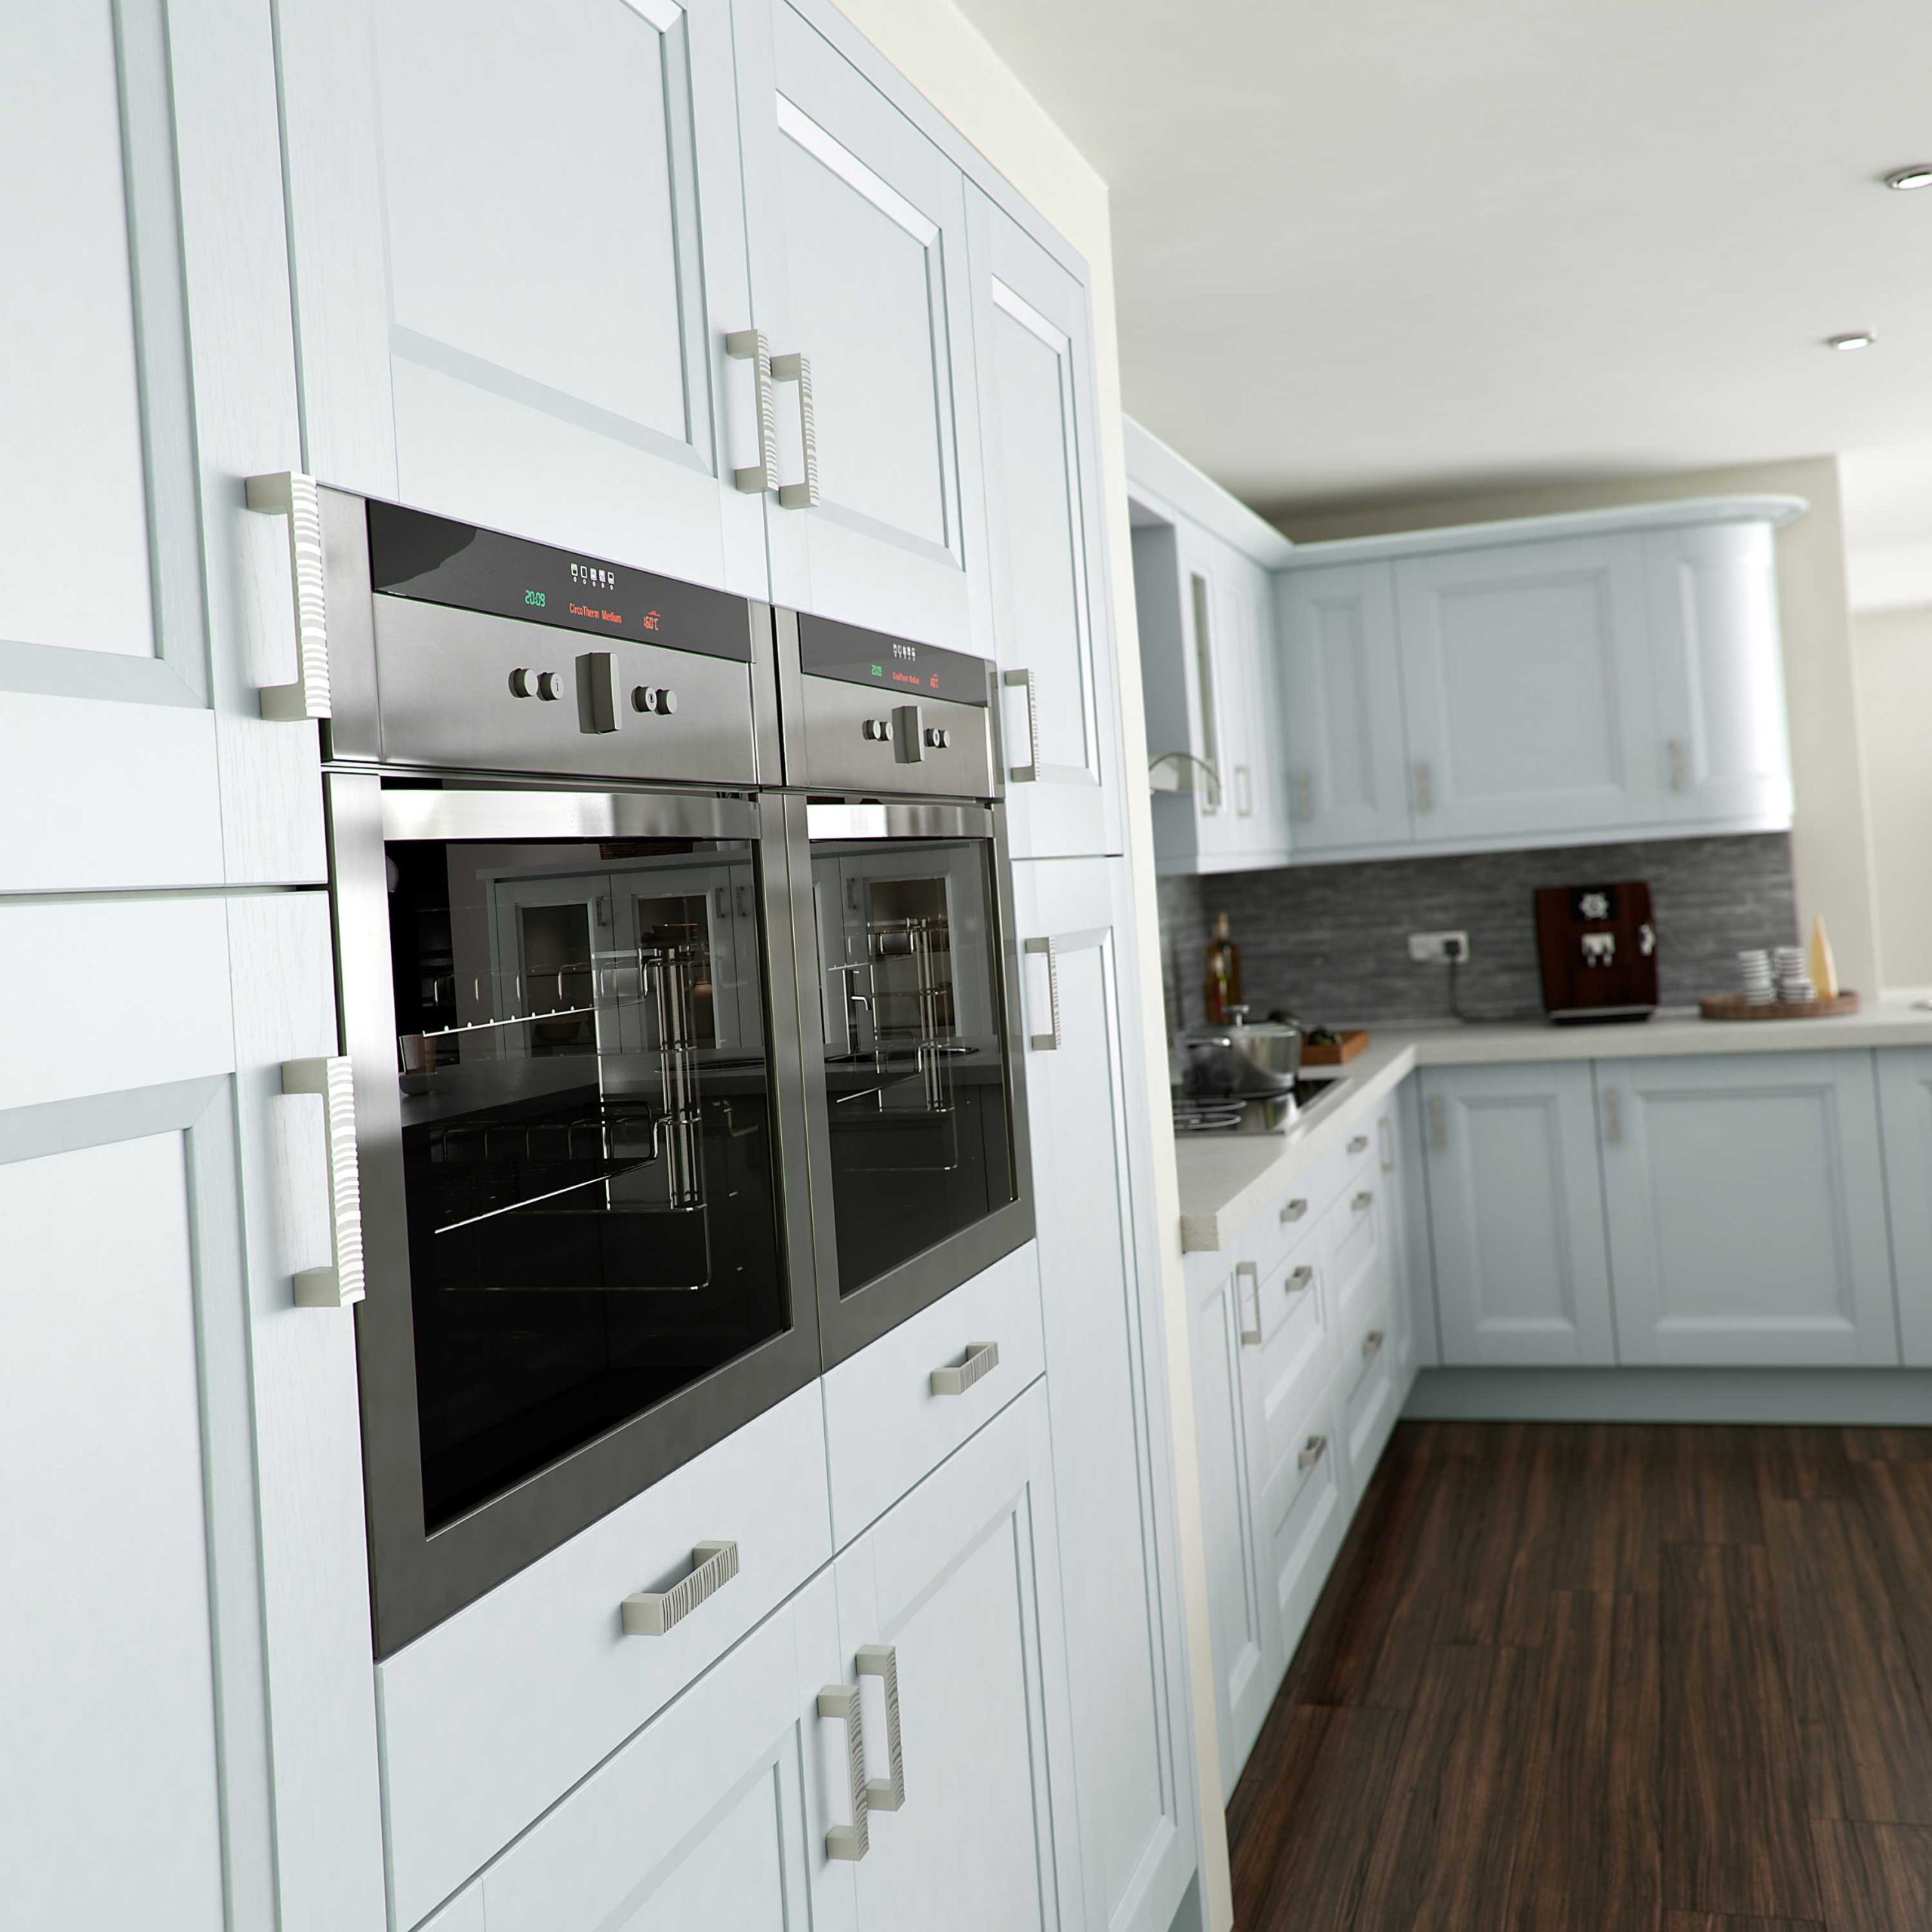 Sheraton Kitchens - Chamfered Shaker kitchen in Light Grey for a country kitchen look